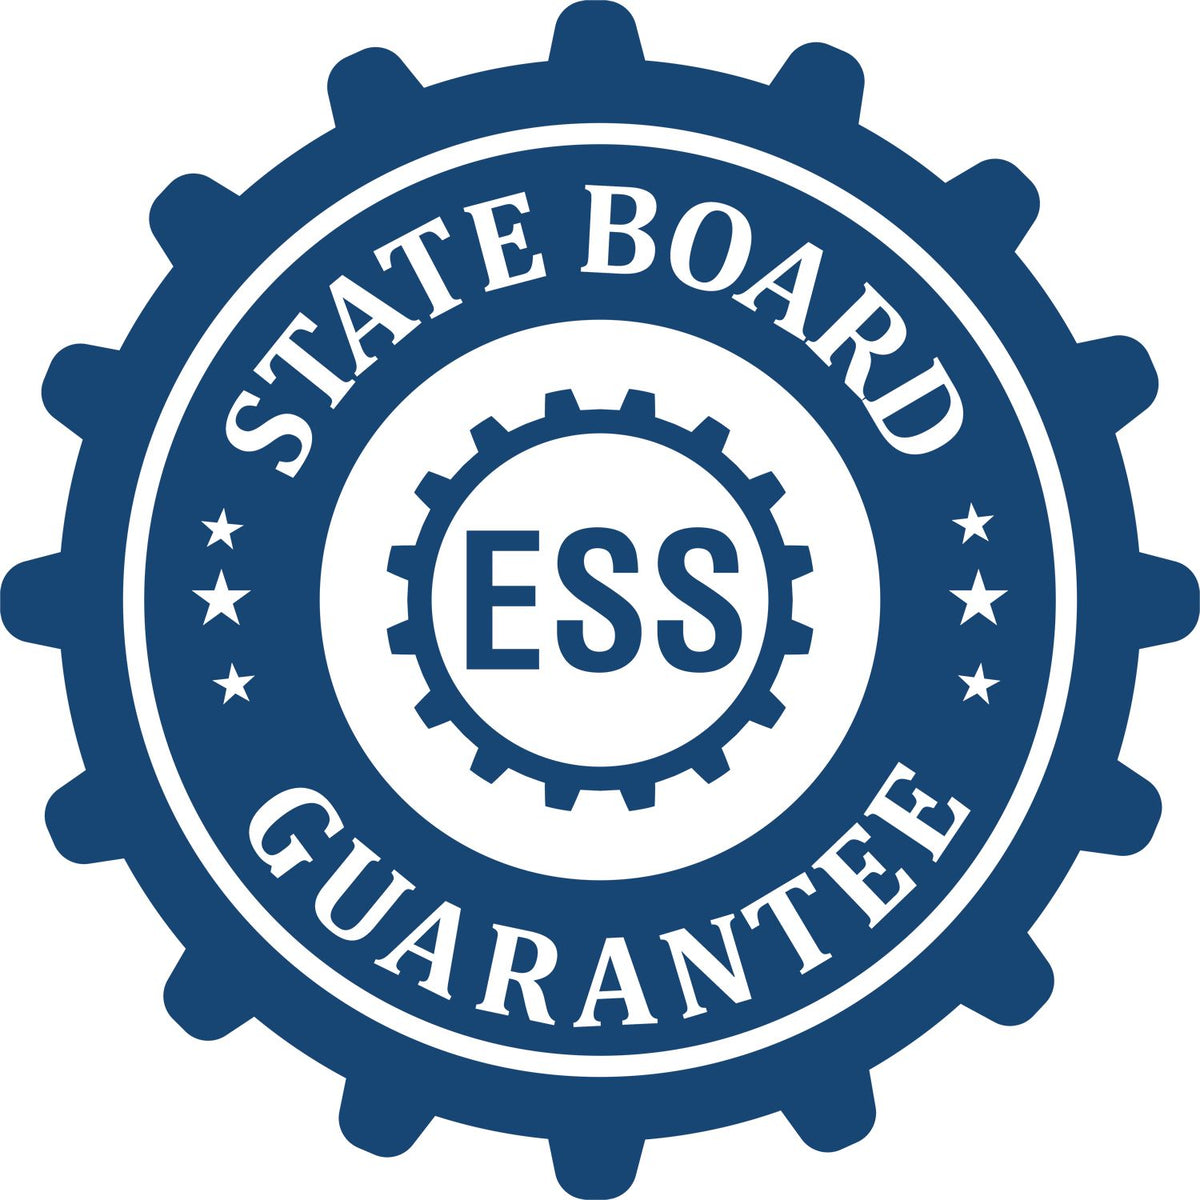 An emblem in a gear shape illustrating a state board guarantee for the Heavy-Duty North Carolina Rectangular Notary Stamp product.